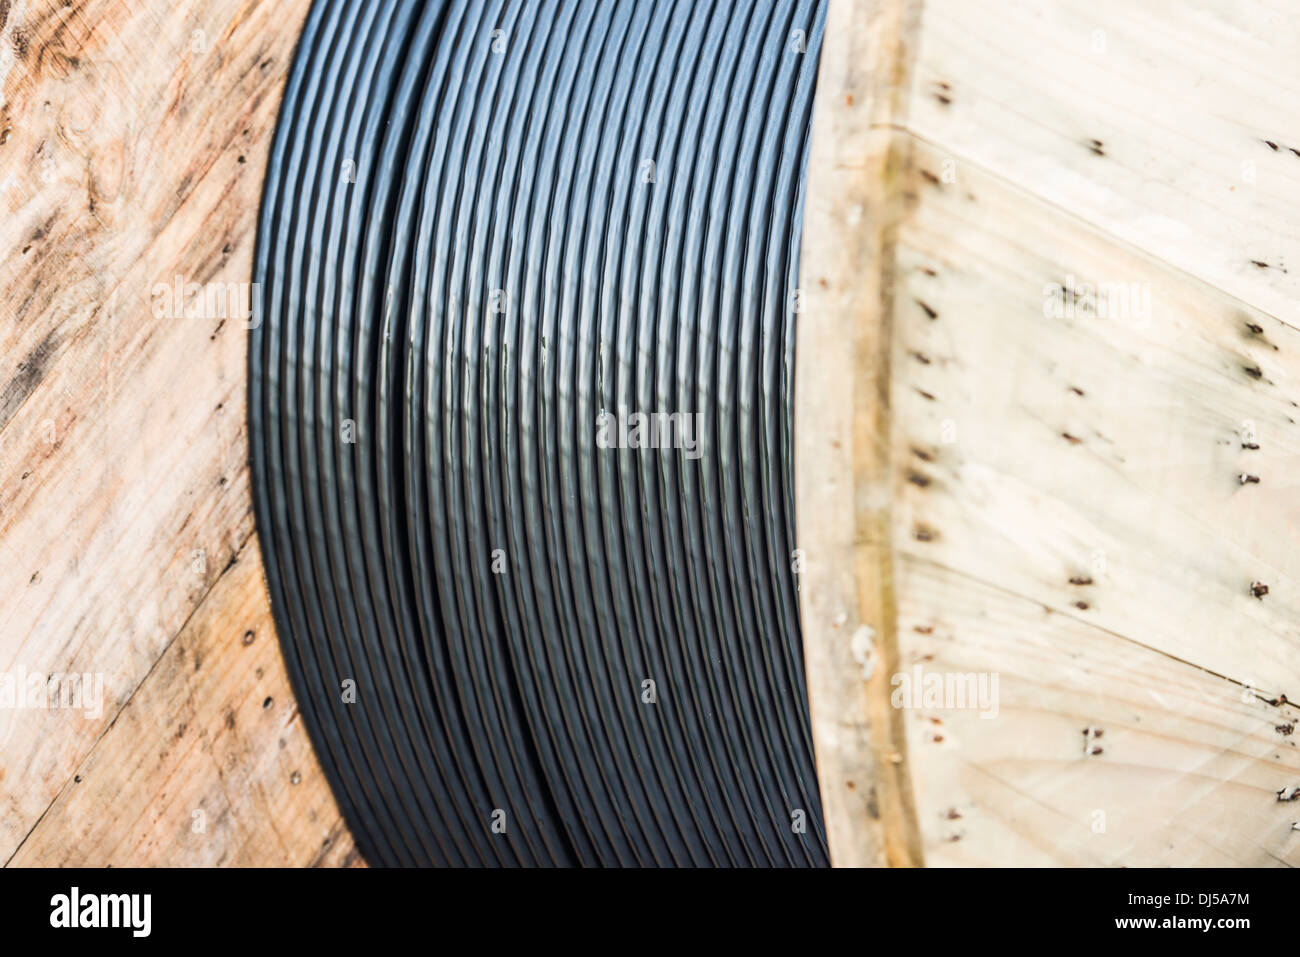 Fiber optic cable on a large wooden spool Stock Photo